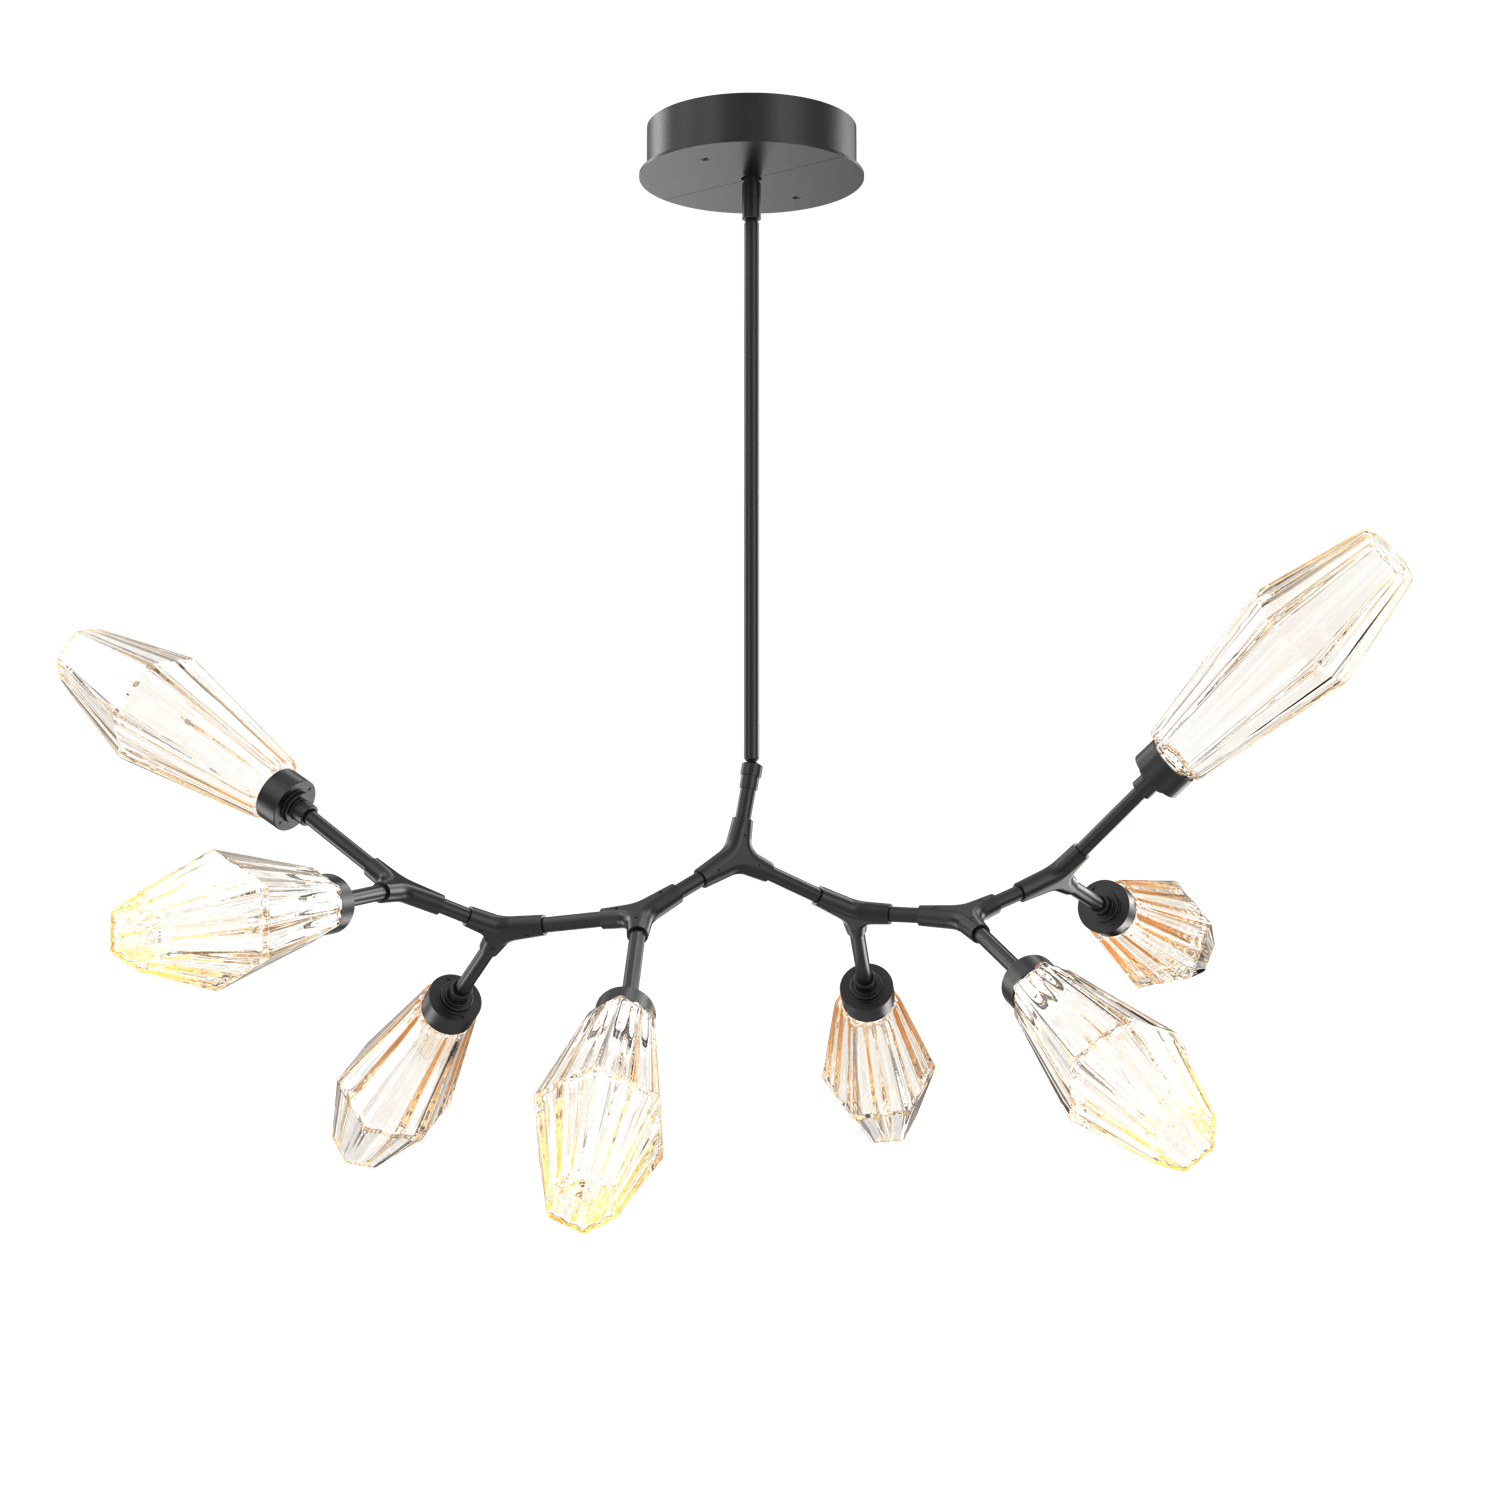 PLB0049-BB-MB-RA-Hammerton-Studio-Aalto-8-light-modern-branch-chandelier-with-matte-black-finish-and-optic-ribbed-amber-glass-shades-and-LED-lamping